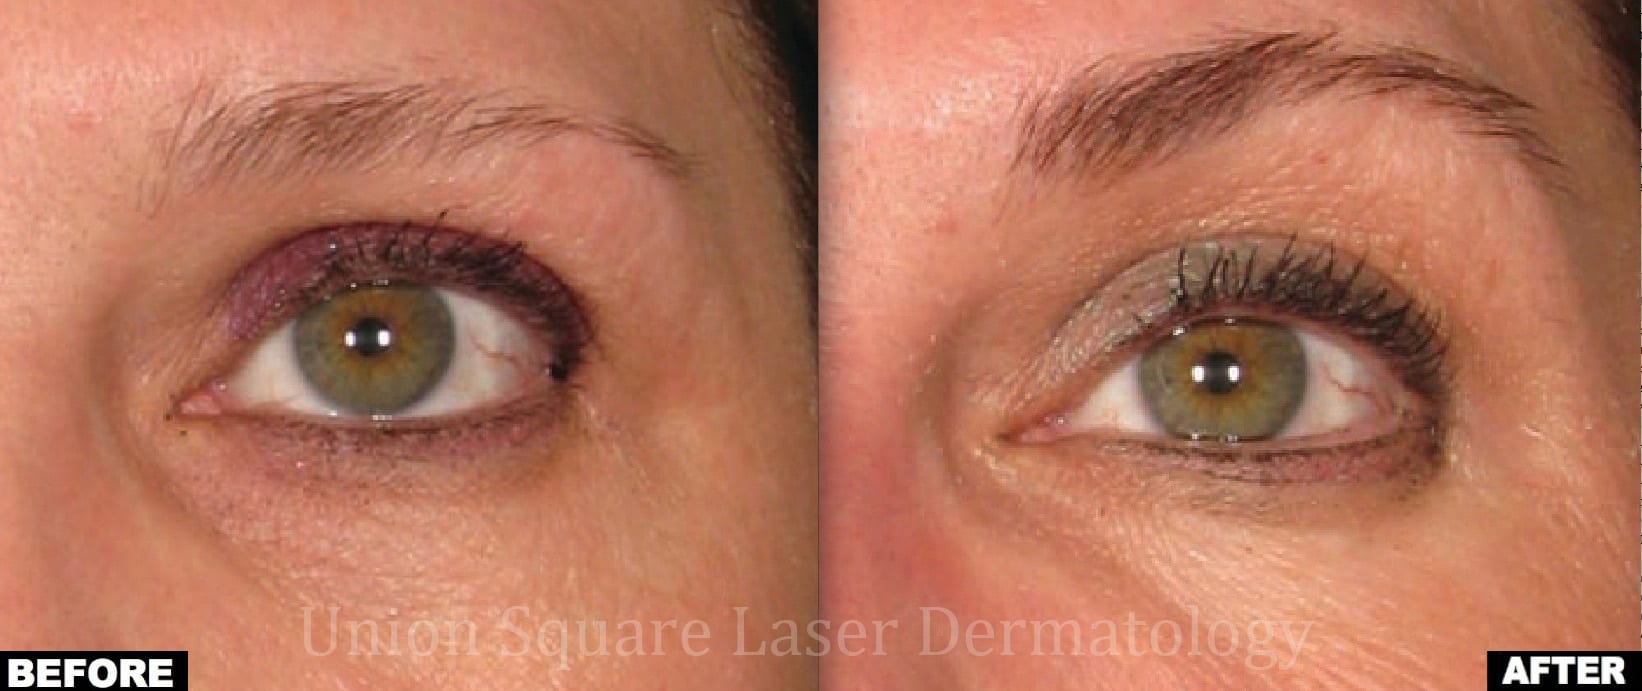 Brow lift before and after photos–Ultherapy